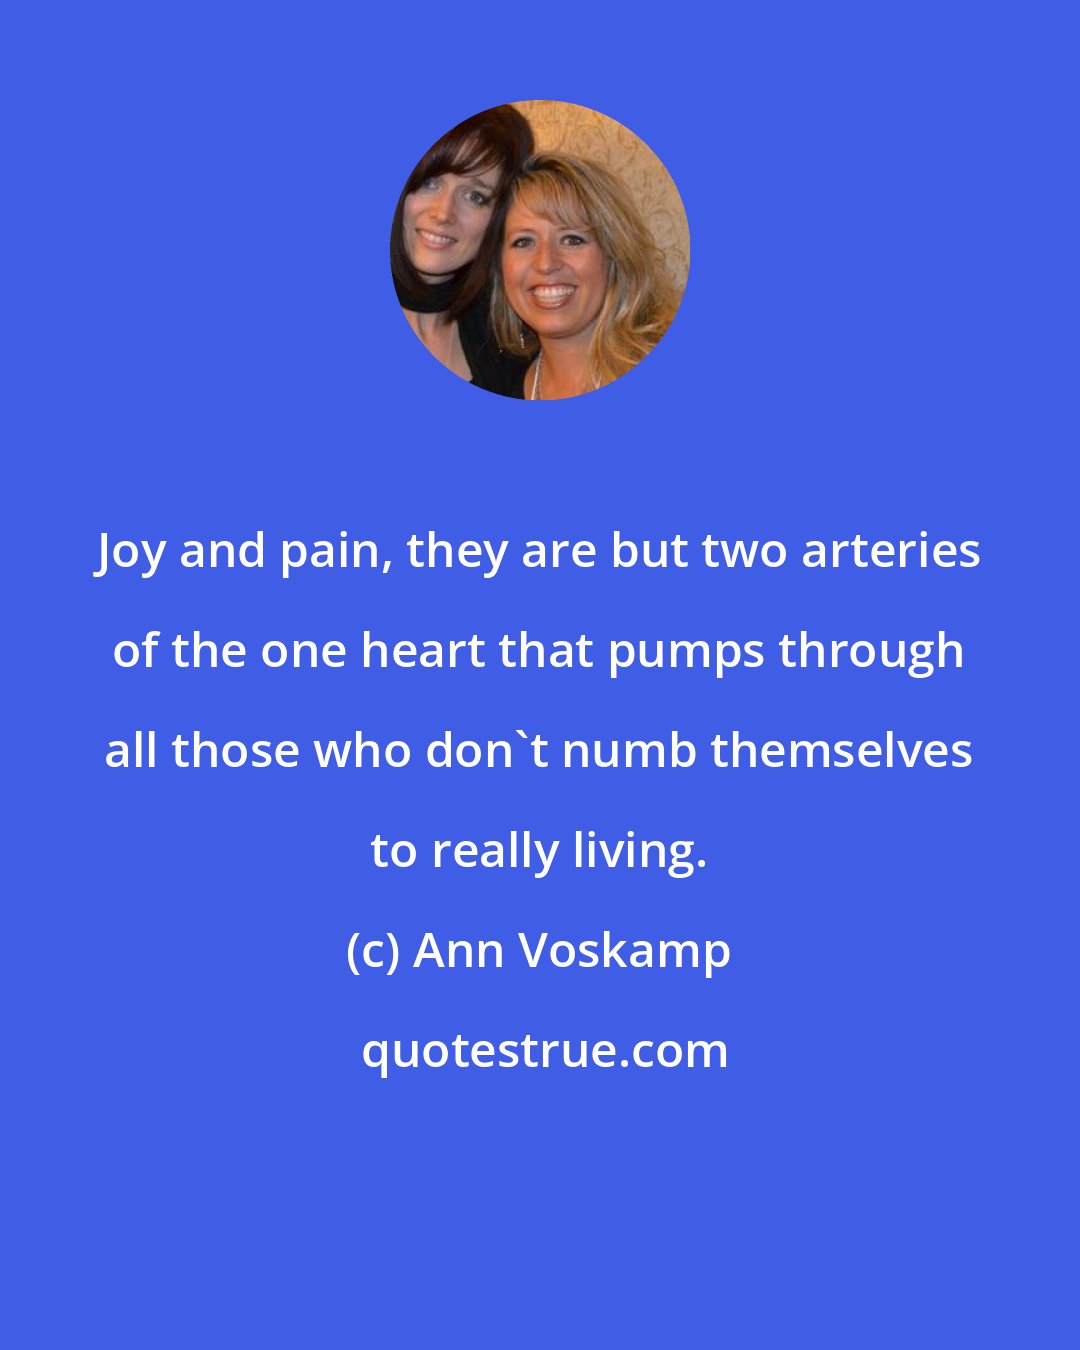 Ann Voskamp: Joy and pain, they are but two arteries of the one heart that pumps through all those who don't numb themselves to really living.